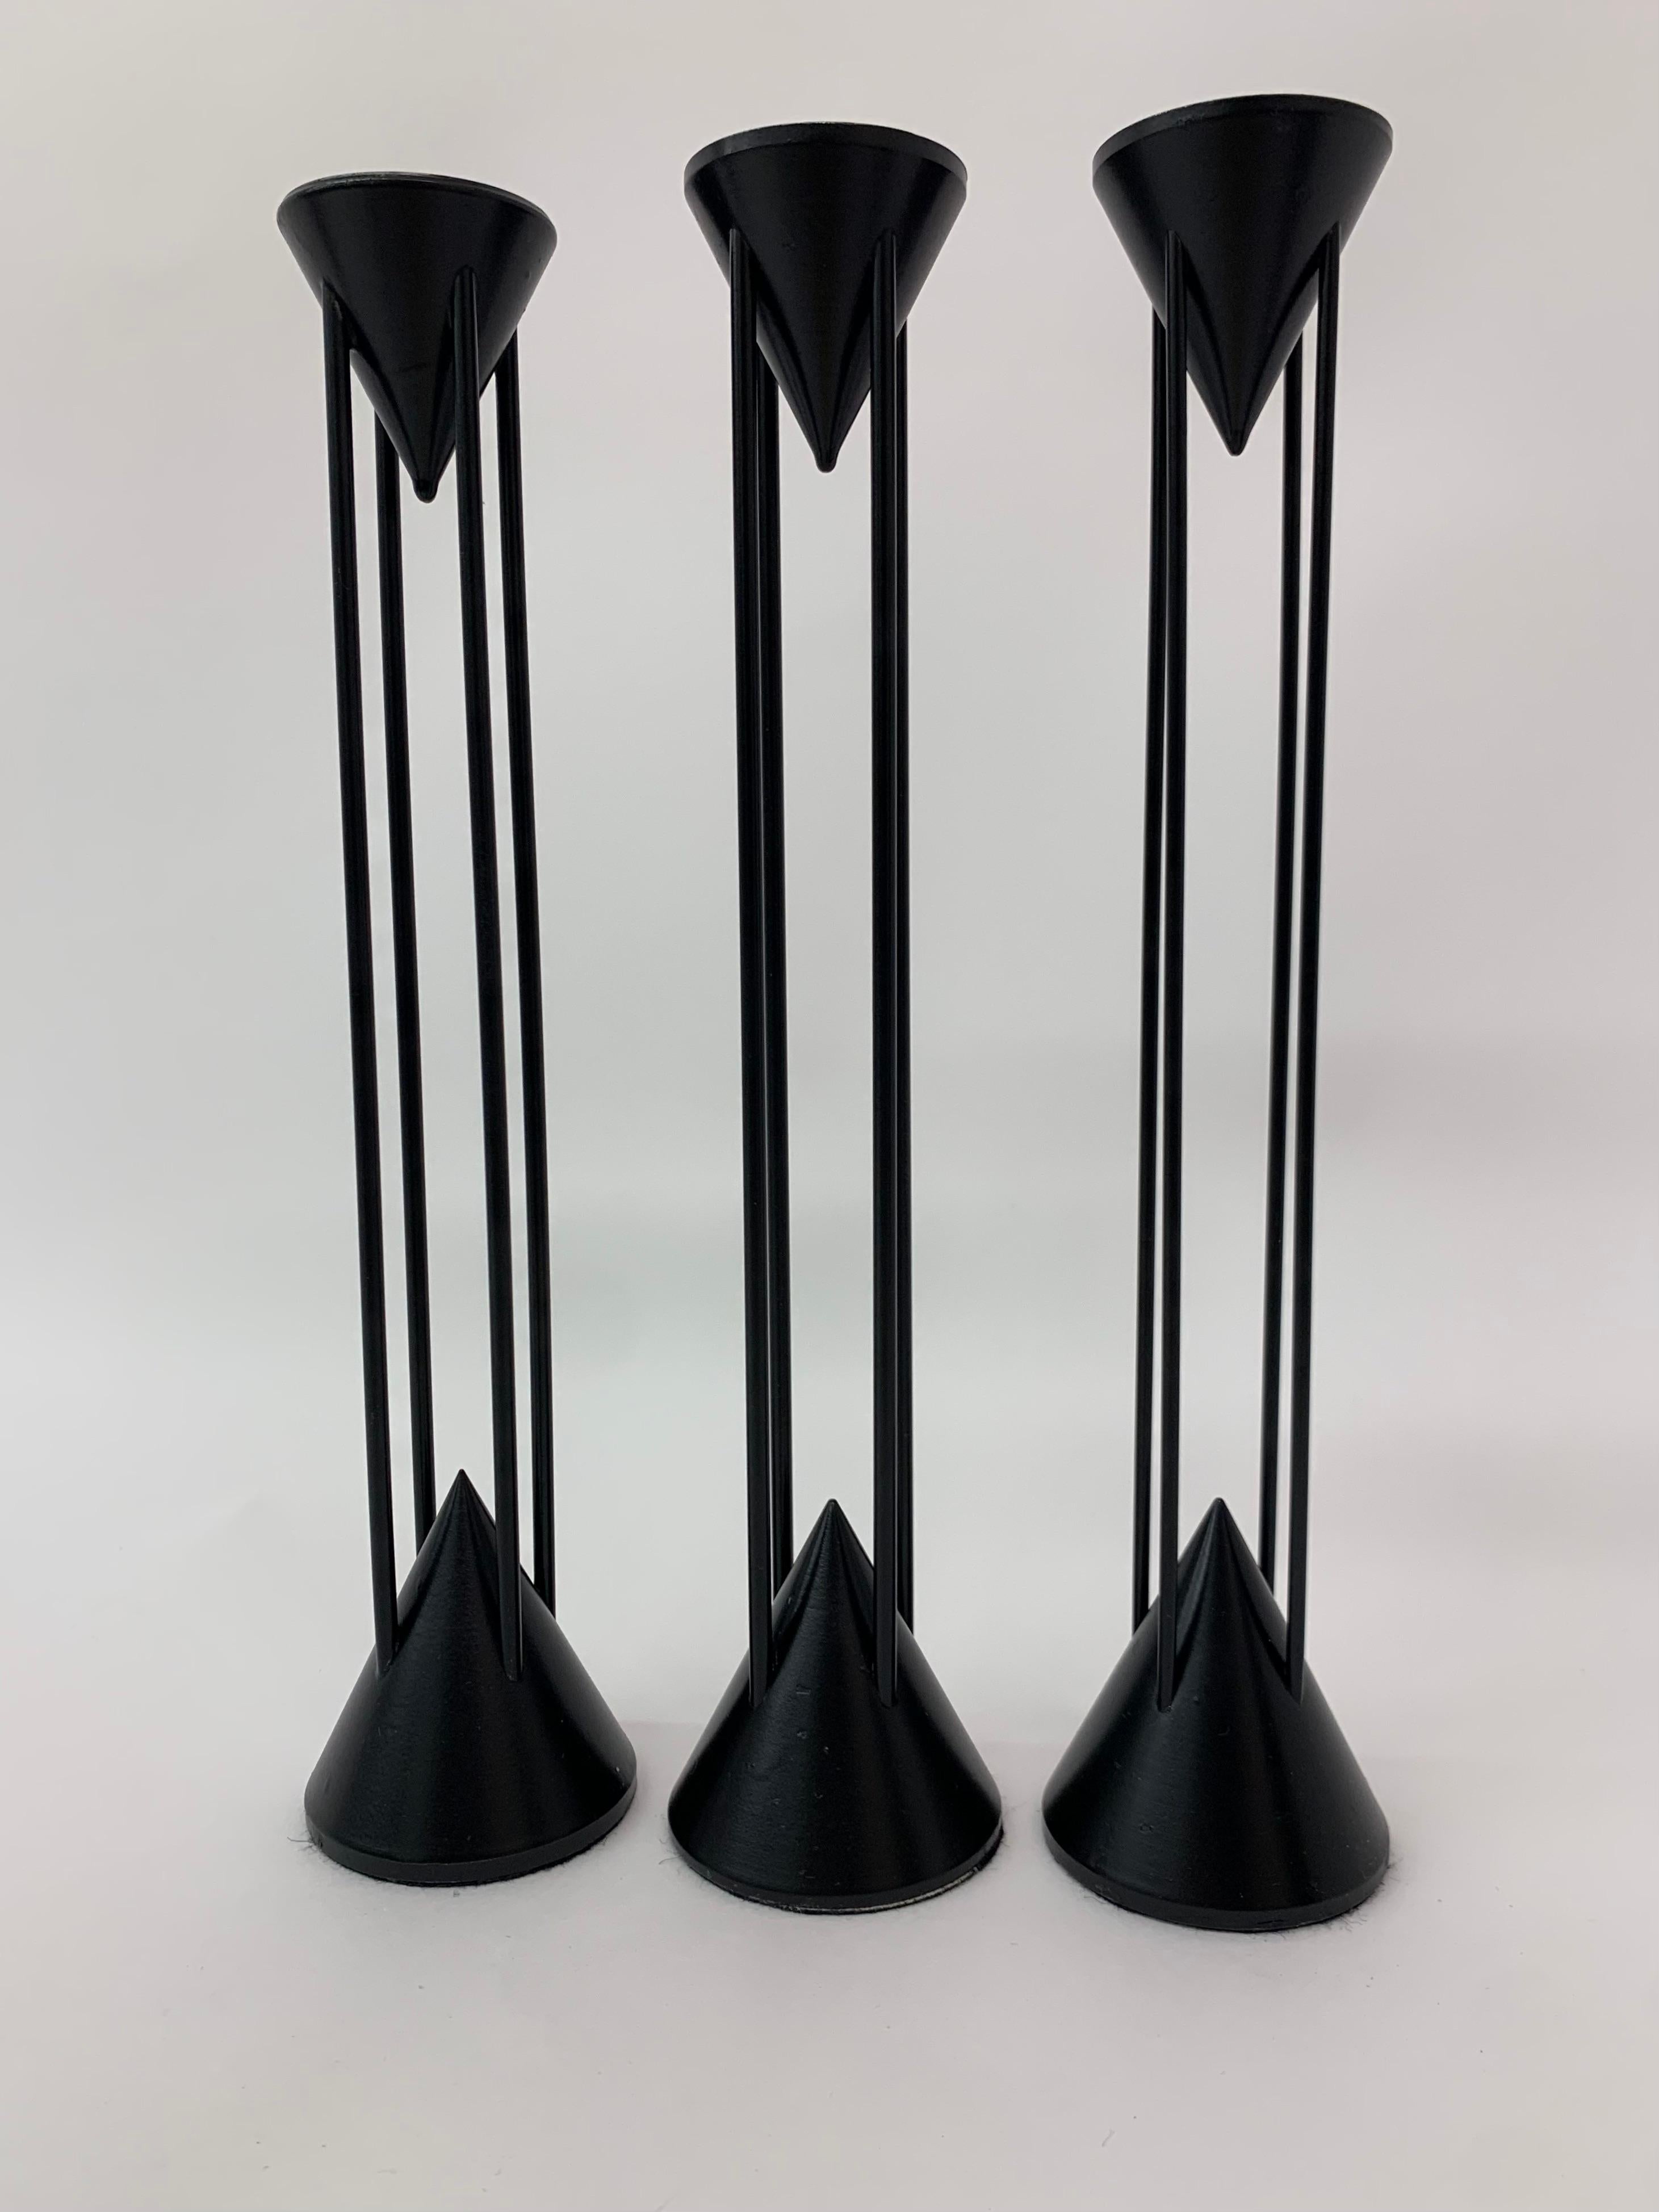 Swedish Set of 3 Post-Modern Memphis Candle Sticks by Markus Borgens, 1980s For Sale